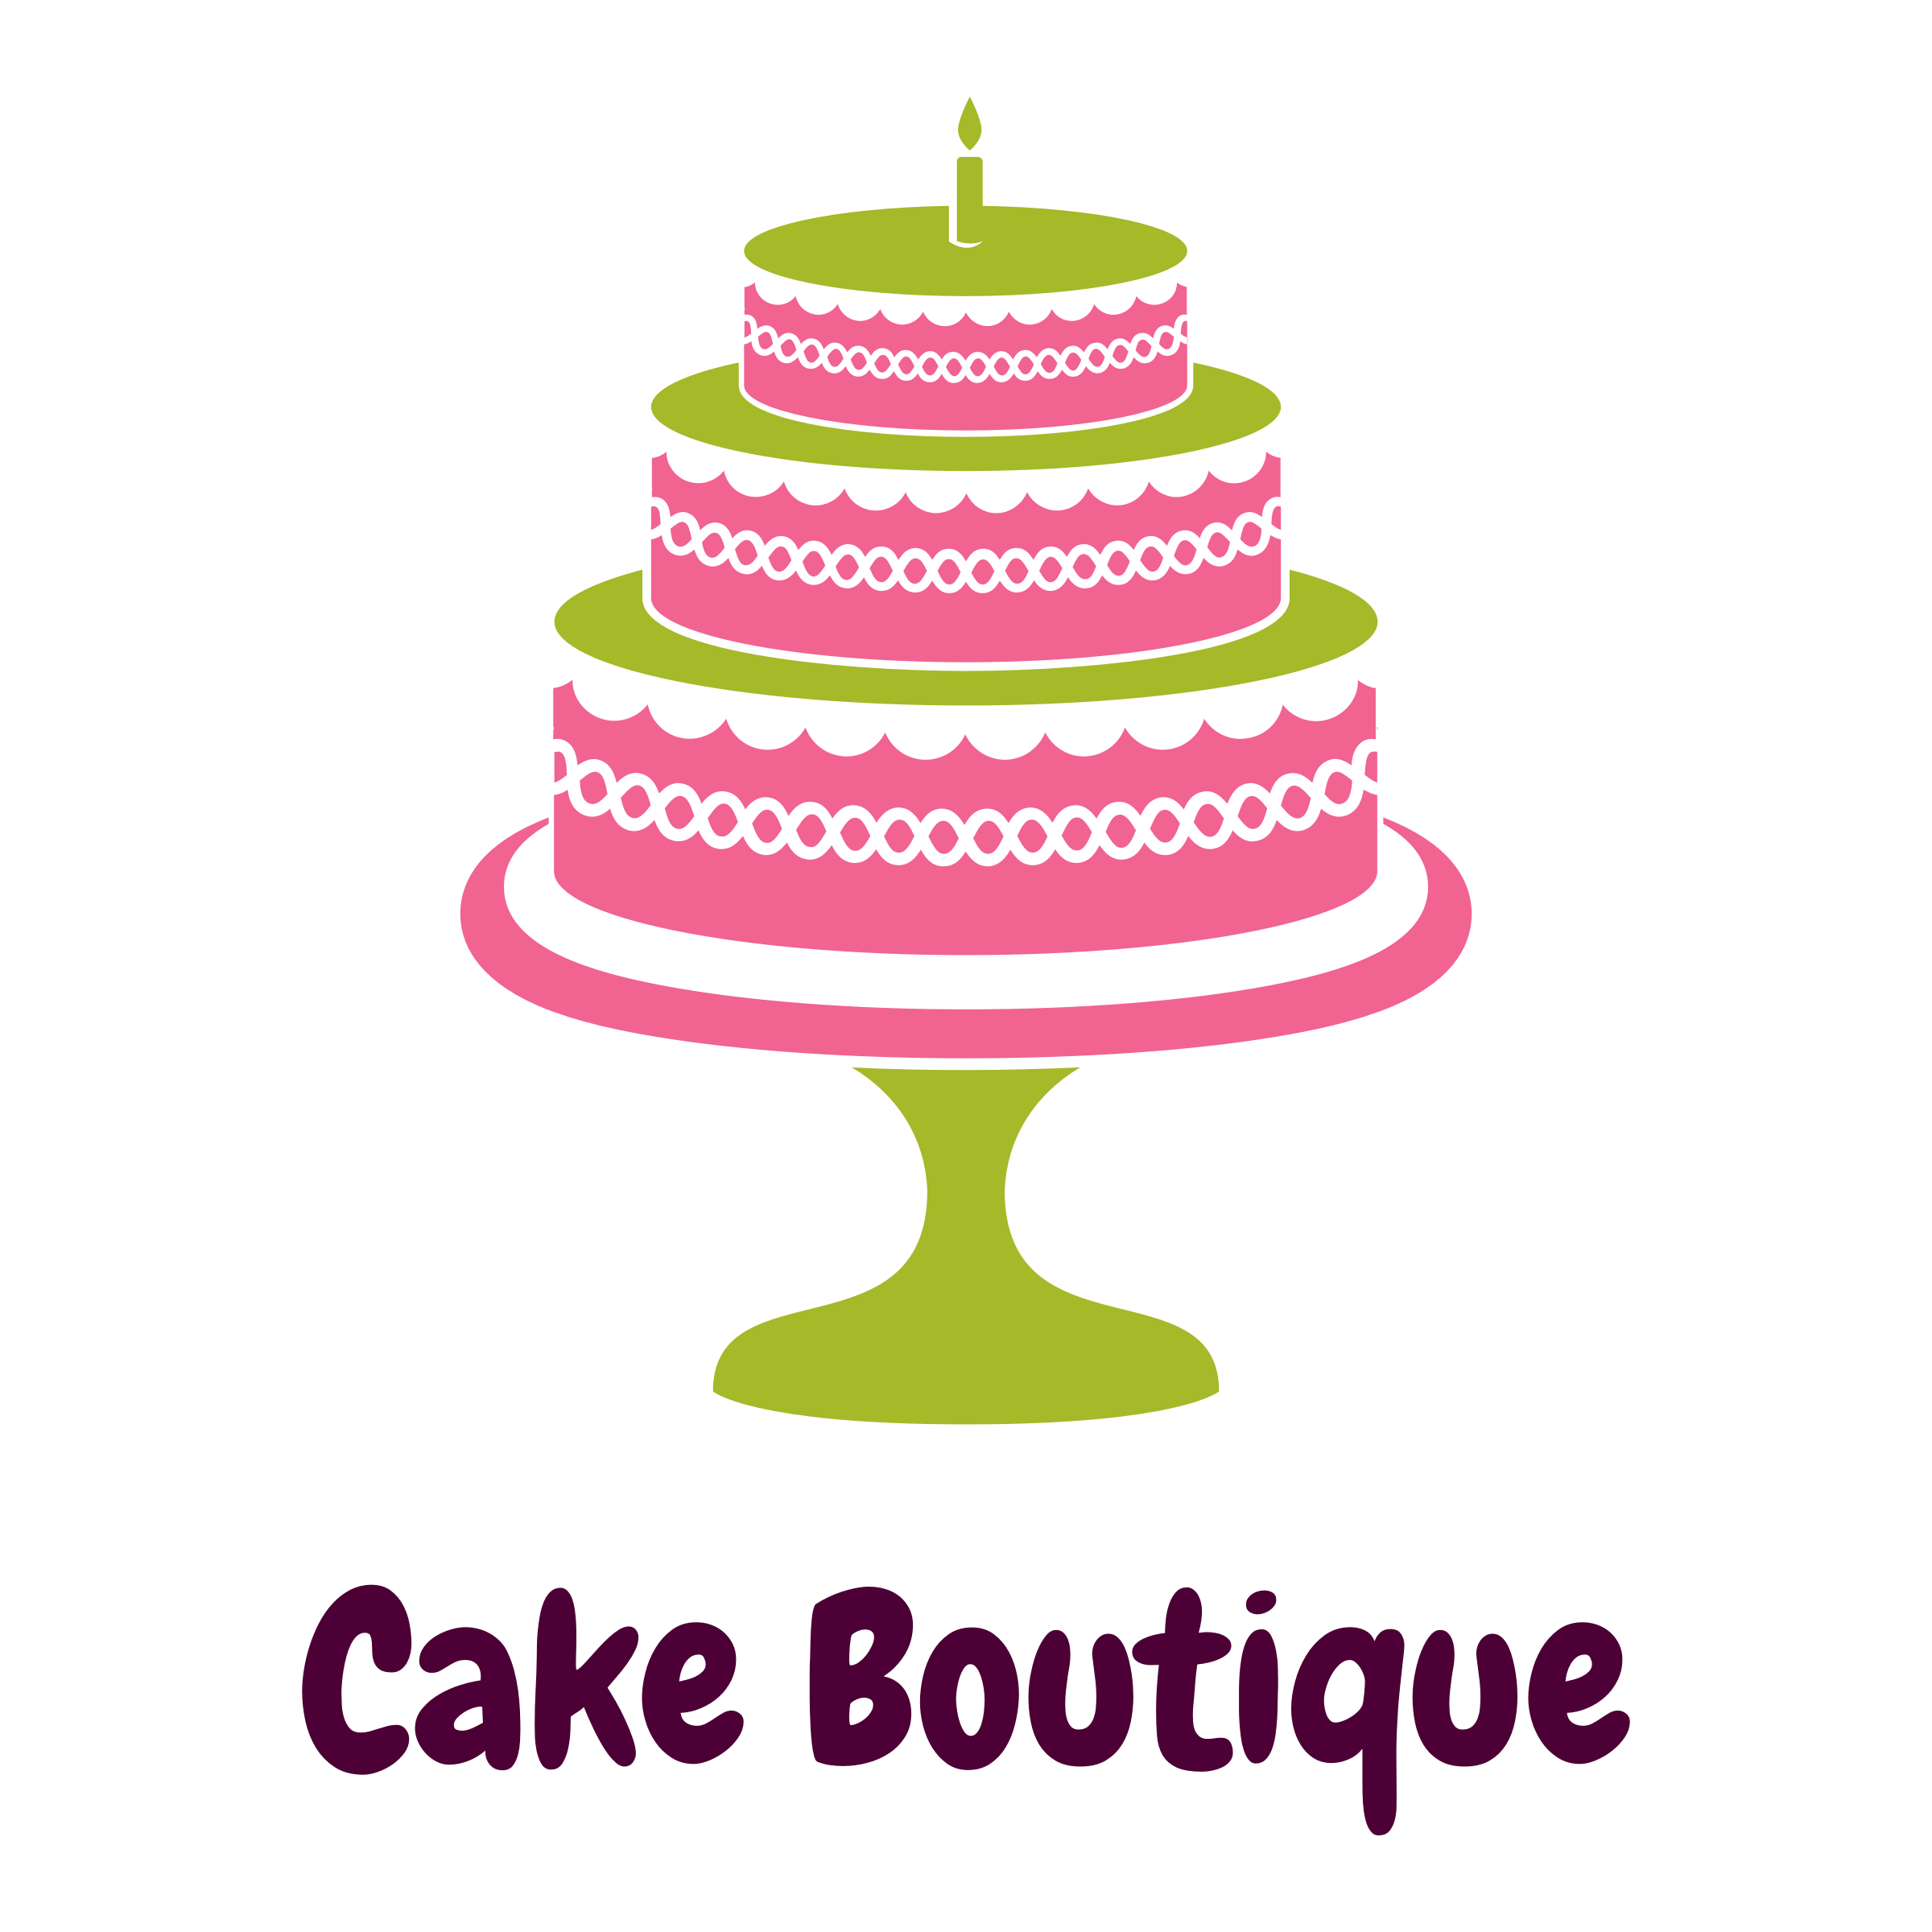 Create a professional cake logo with our logo maker in under 5 minutes